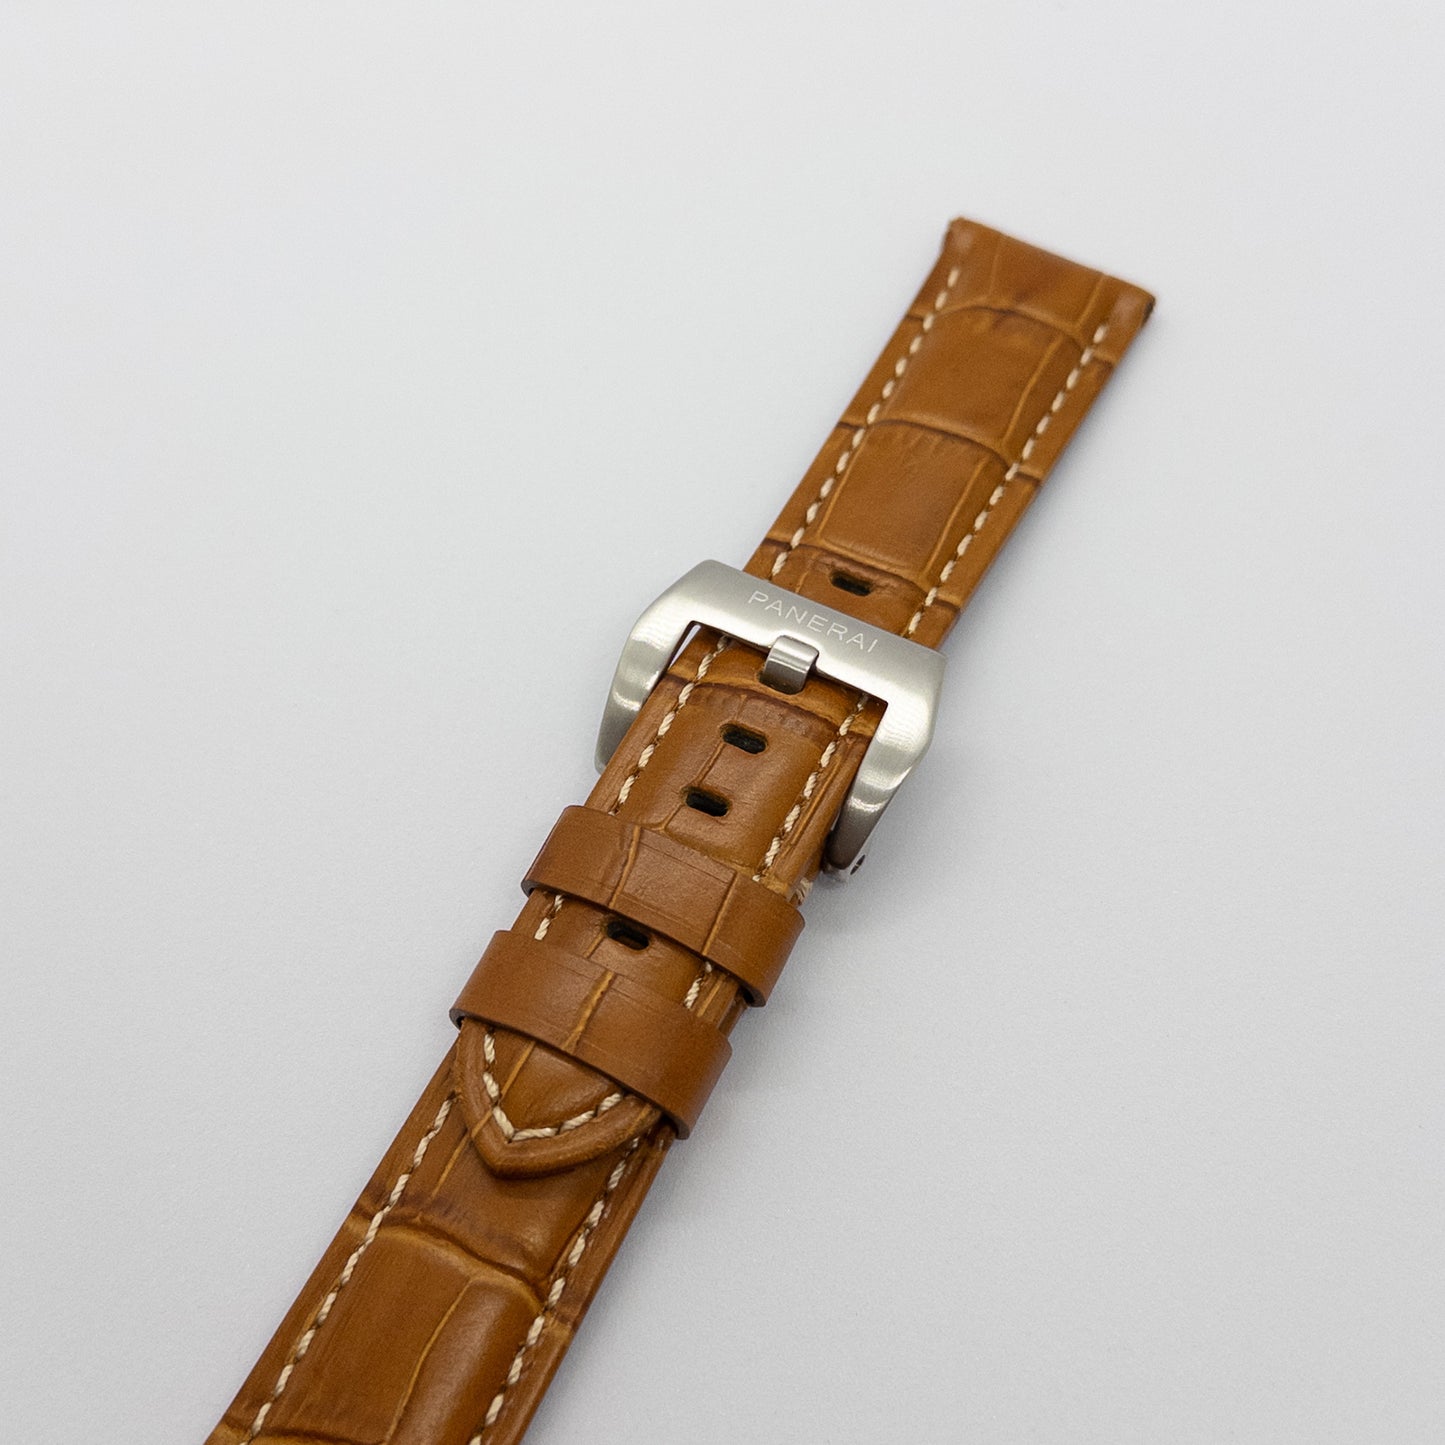 22mm panerai brown leather watchband